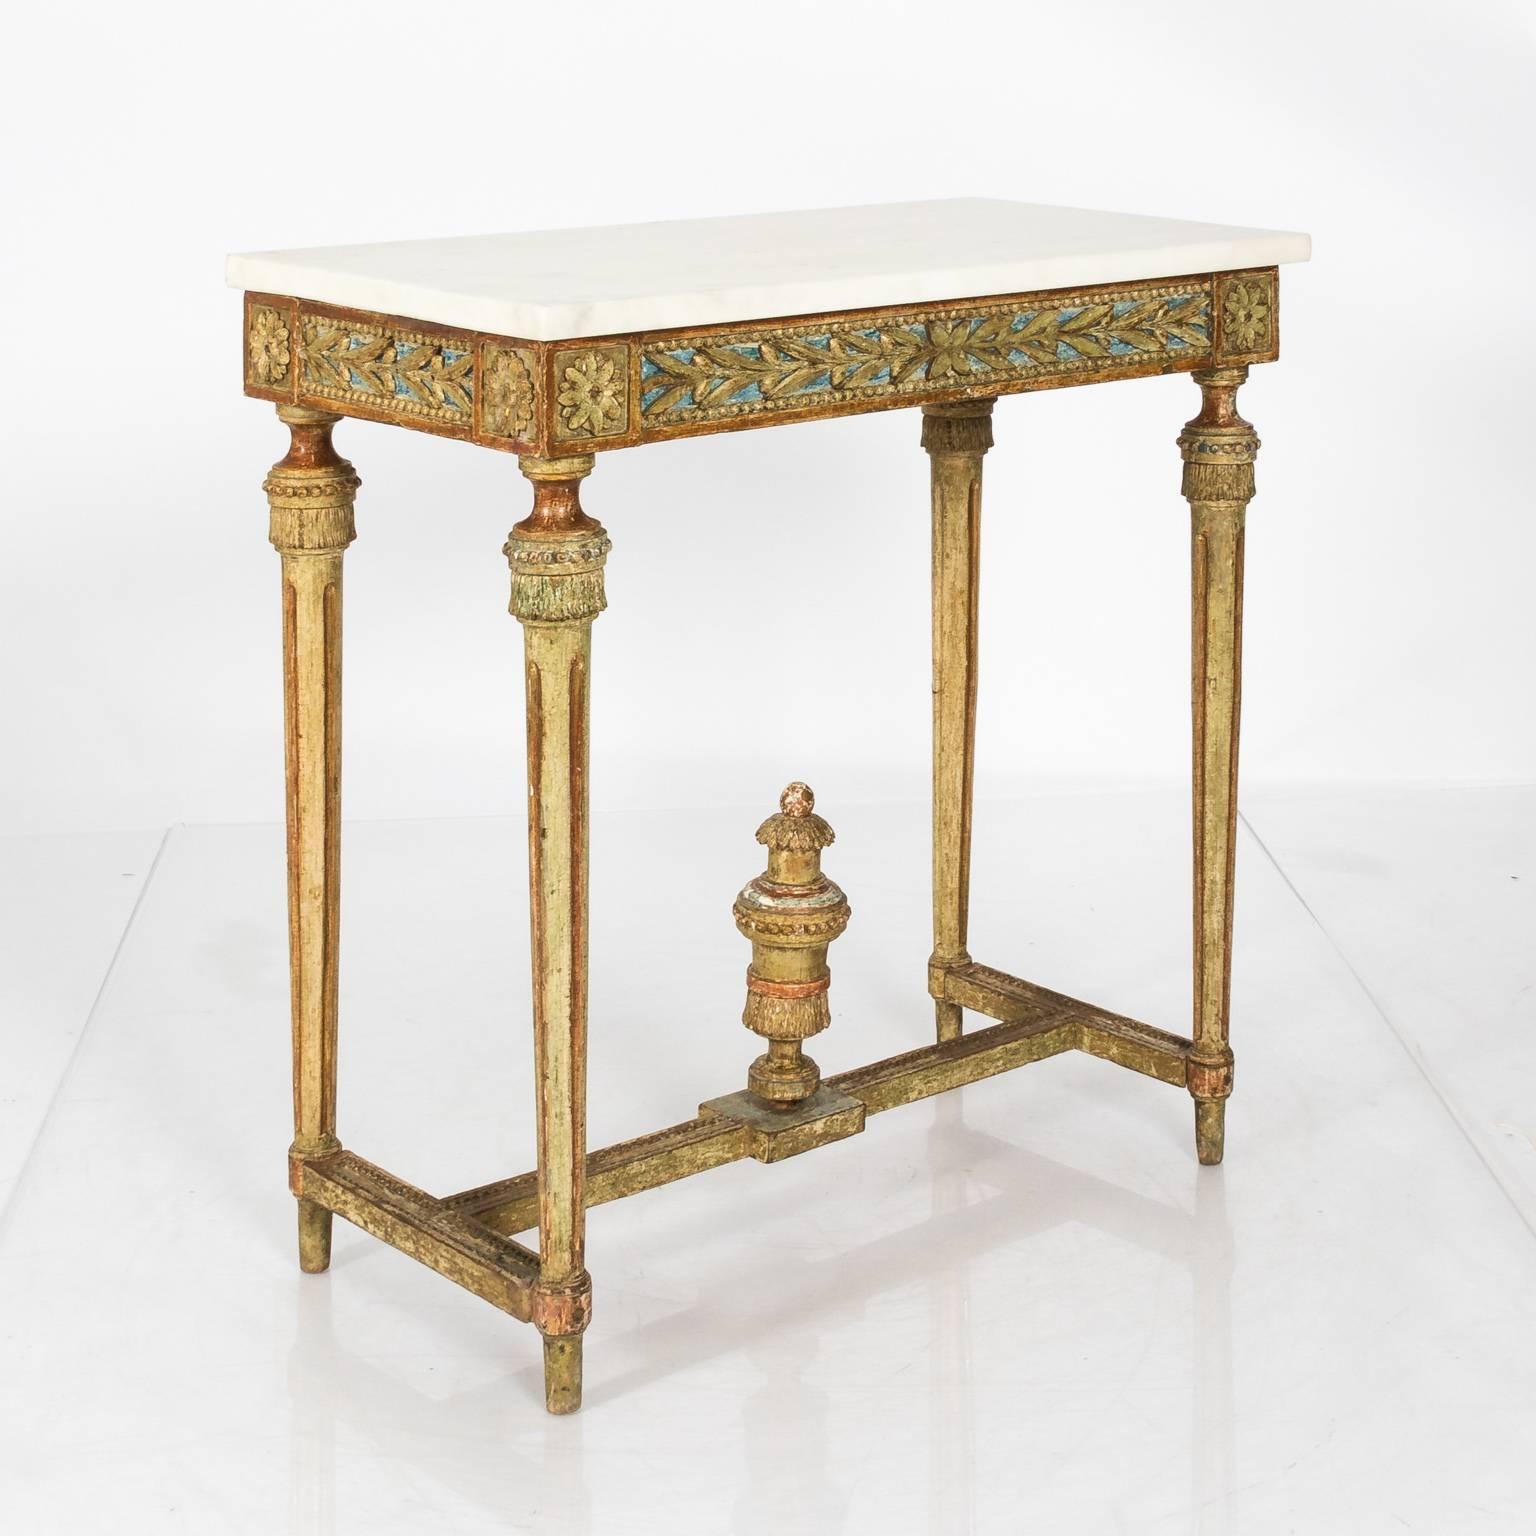 A giltwood Gustavian console table with a white marble top, carved frieze with foliage and rosettes.
    